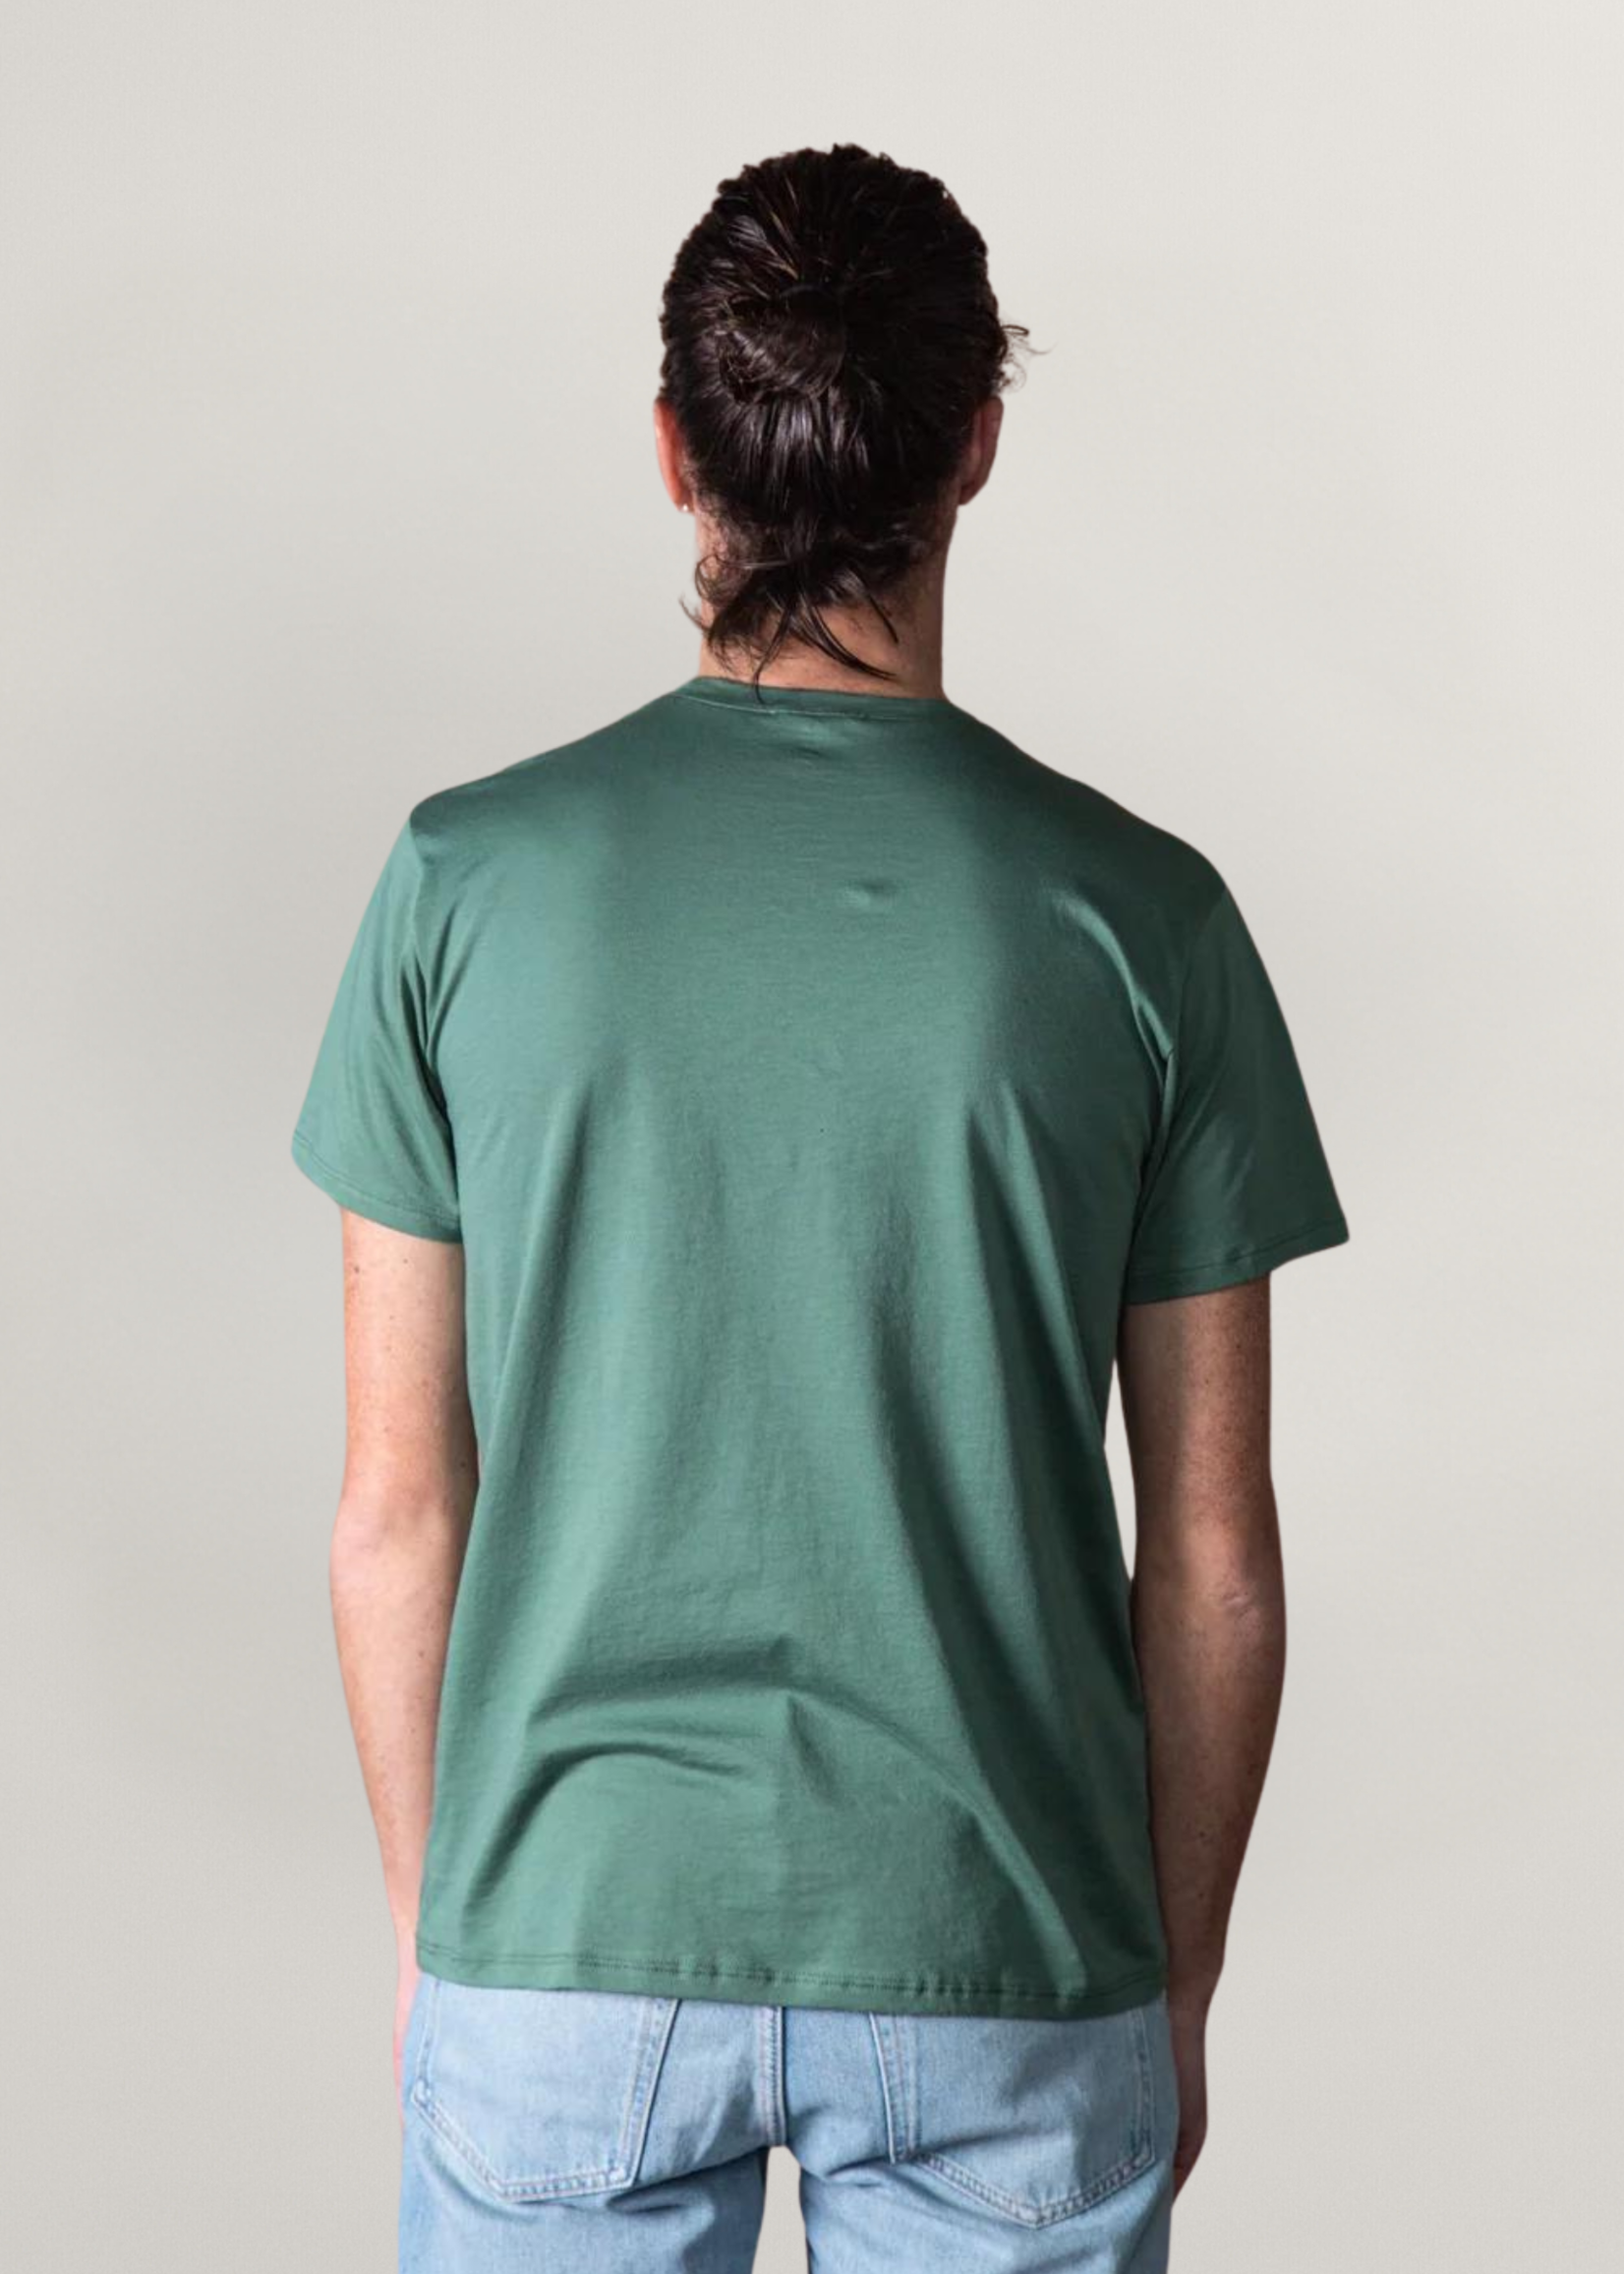 ANONYM APPAREL JULES T-shirt - Forest